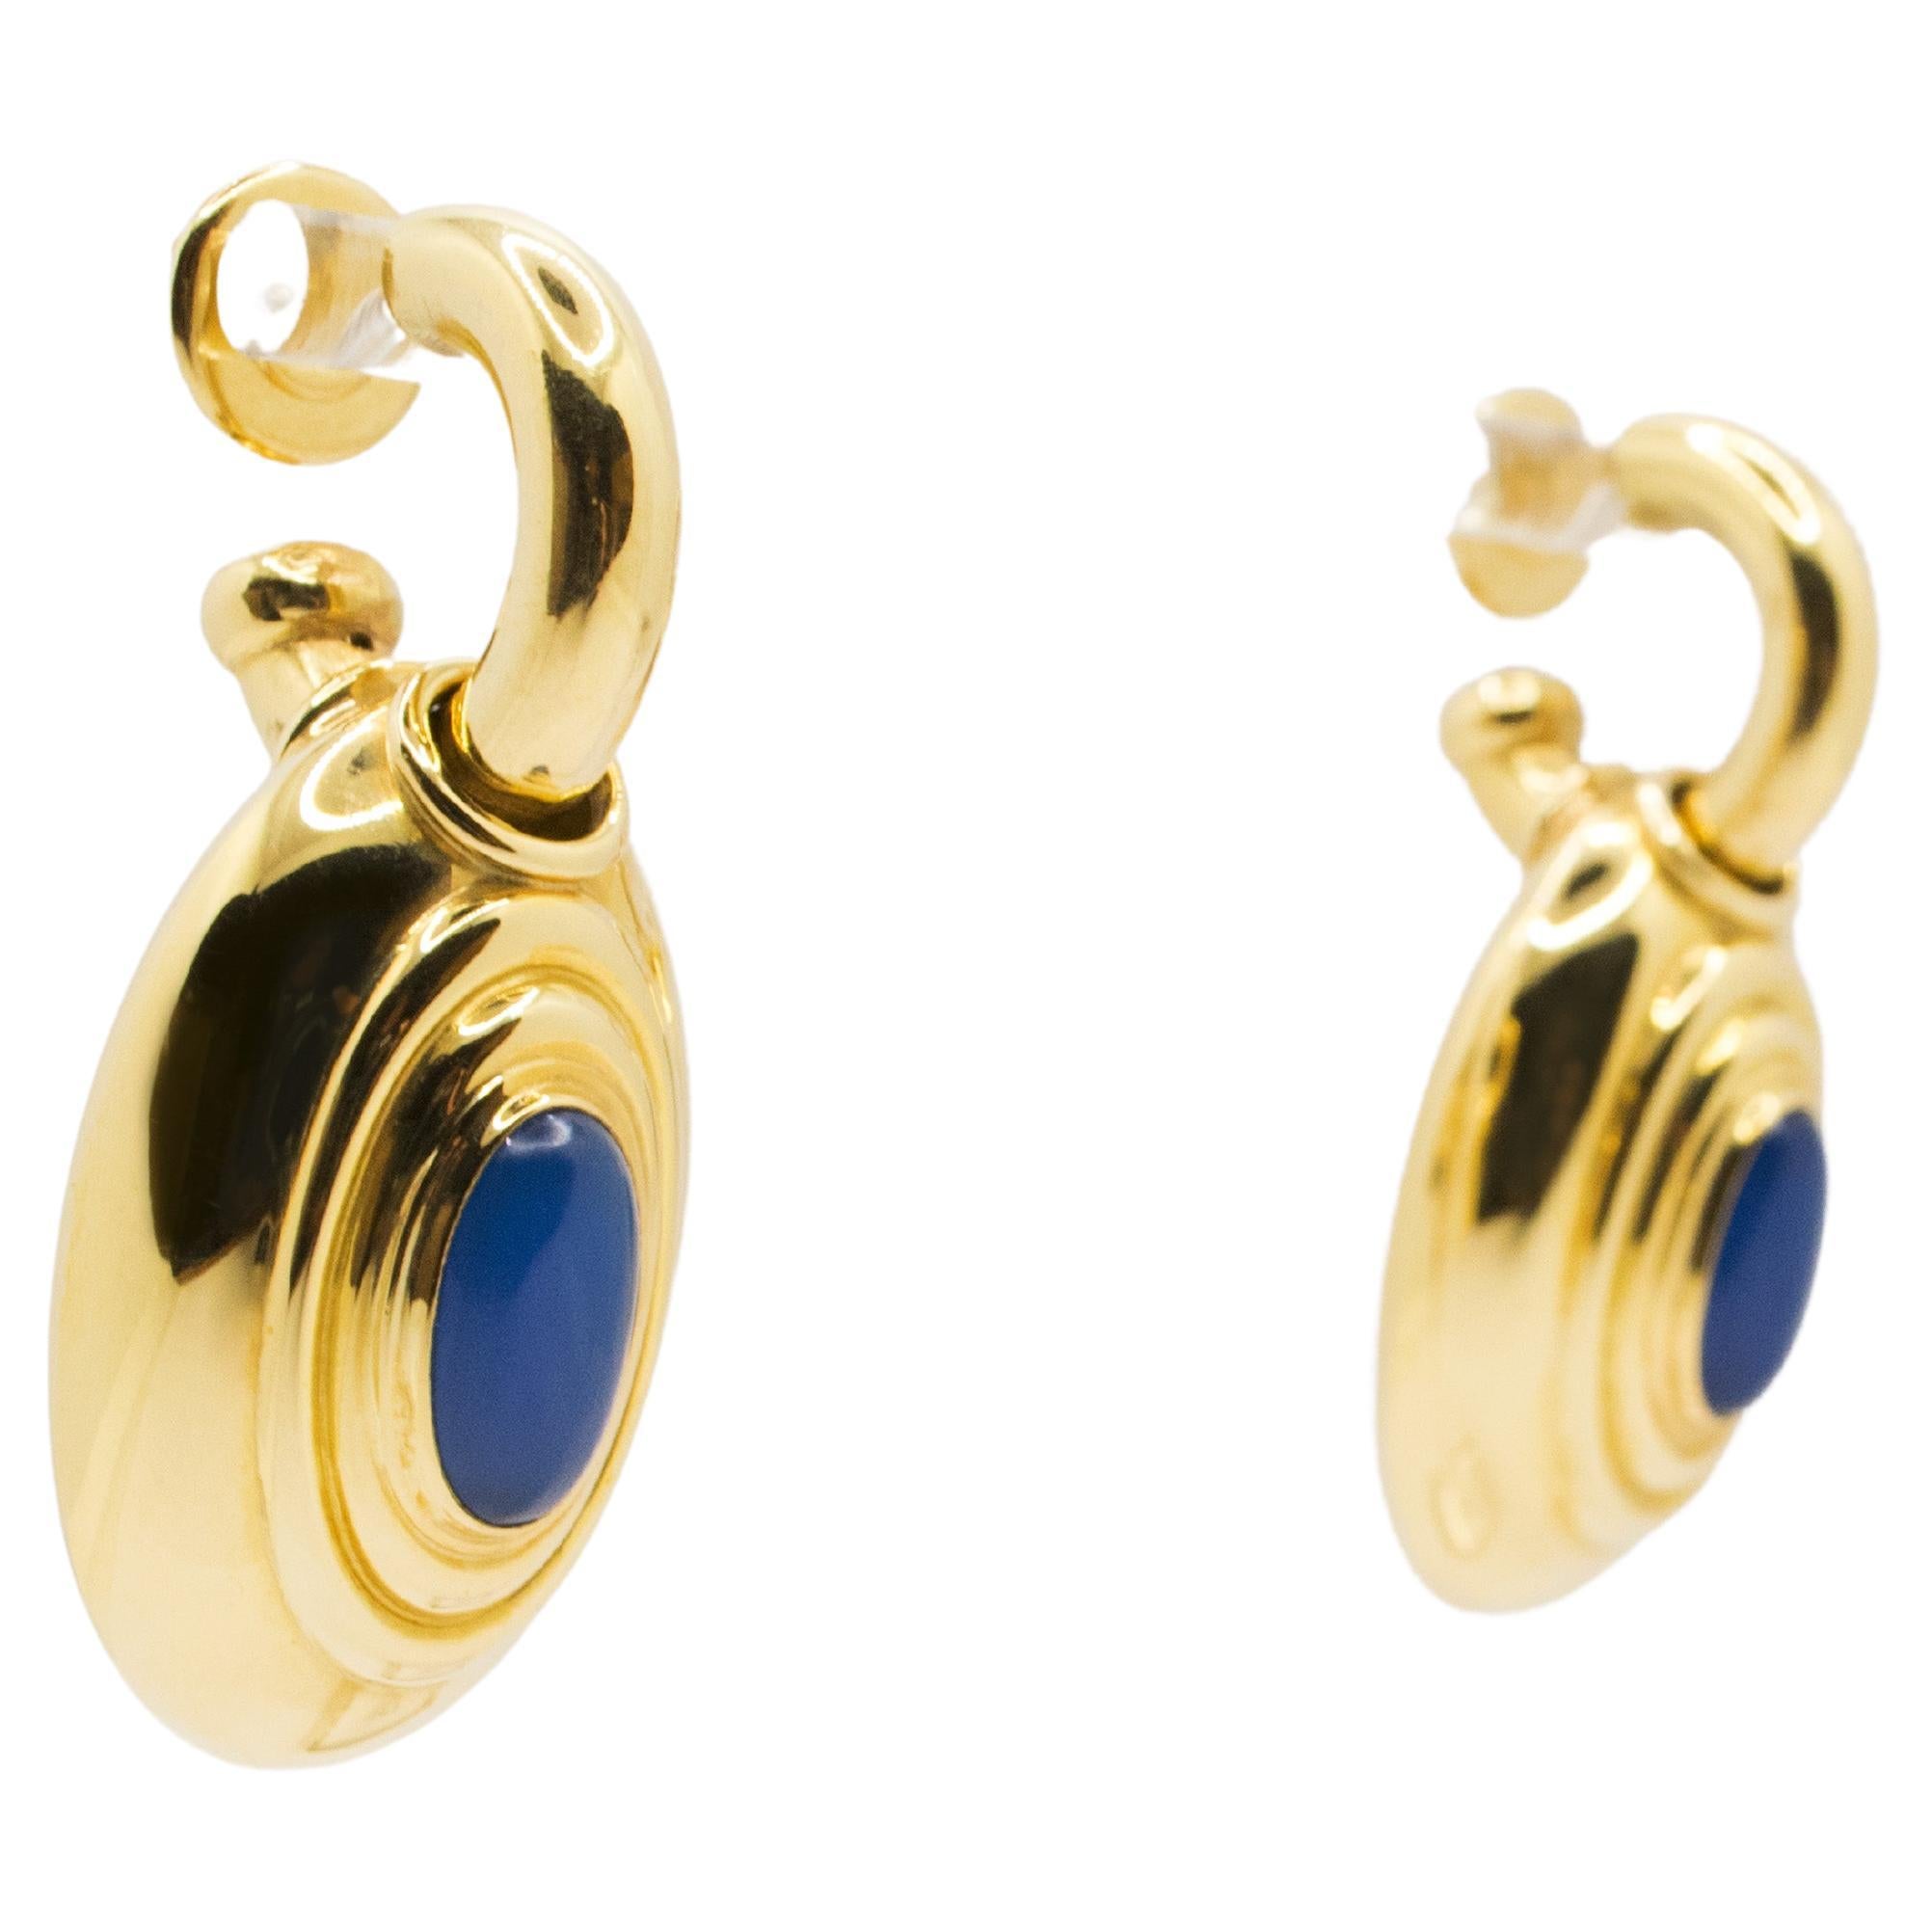 A pair of earrings in full 90s style.
They are made of 18 kt gold , their total weight is gr18.60.
They are composed of two parts, the upper part in the shape of a circle with a butterfly clasp and the lower part, oval, with a cabochon-cut blue